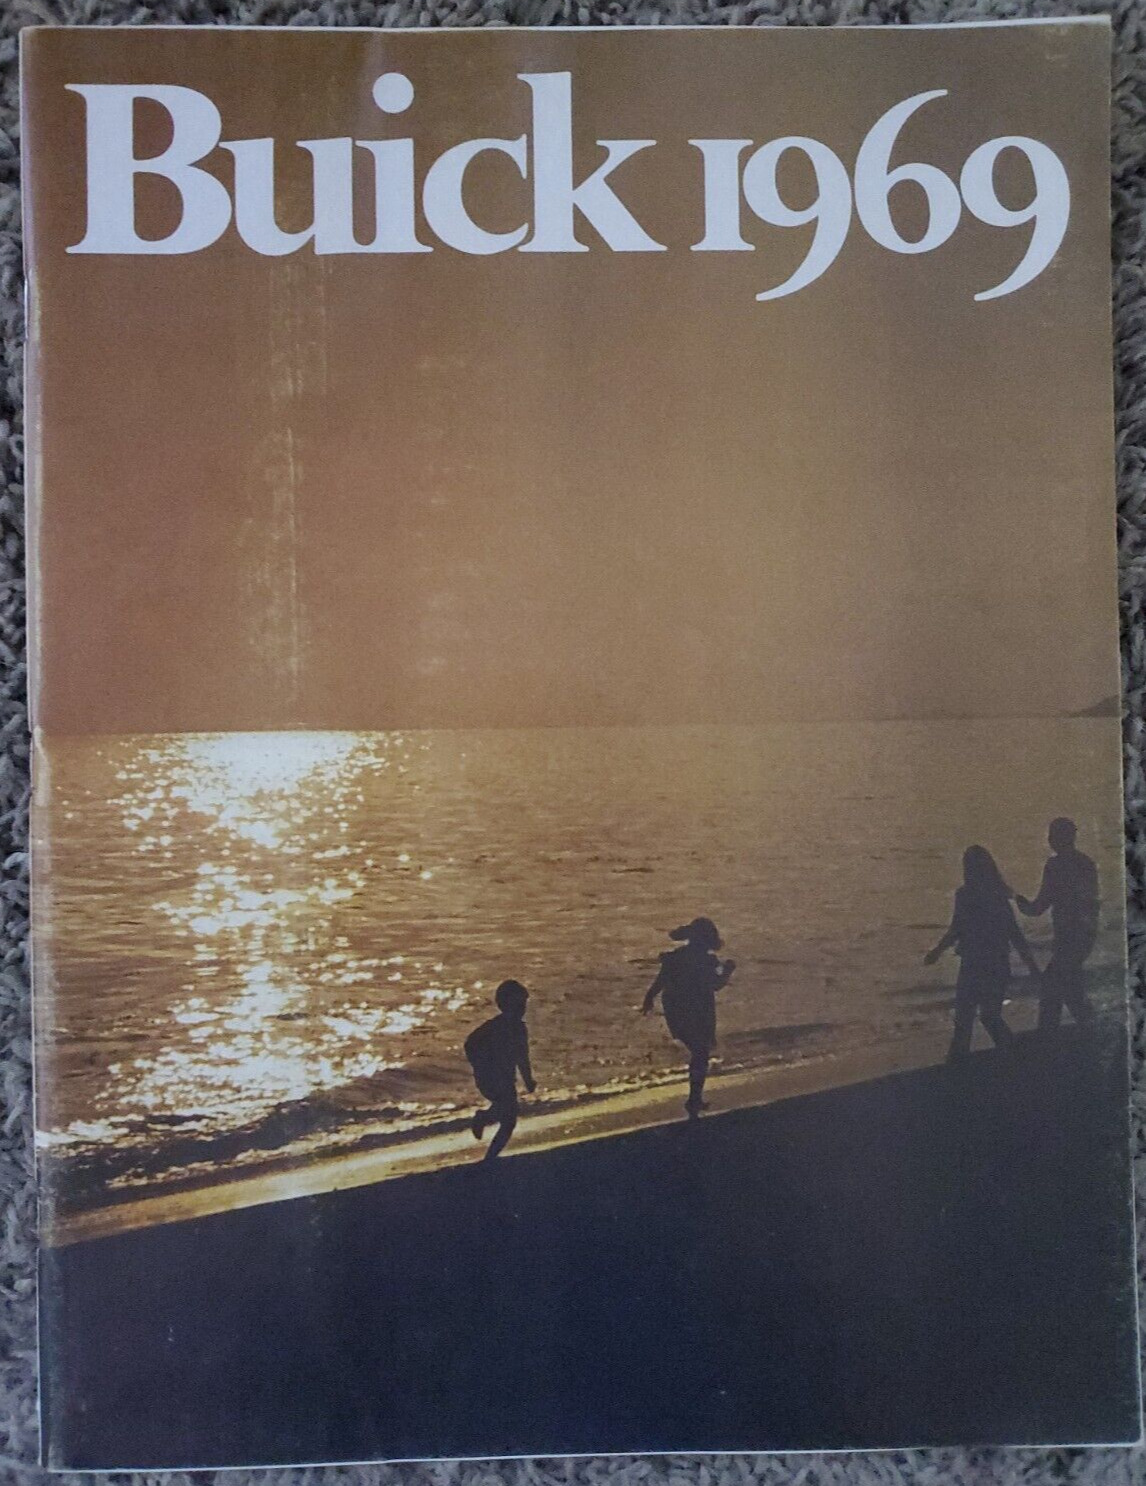 ORIGINAL 1969 BUICK FULL LINE 74 PAGE SALES BROCHURE Great Condition